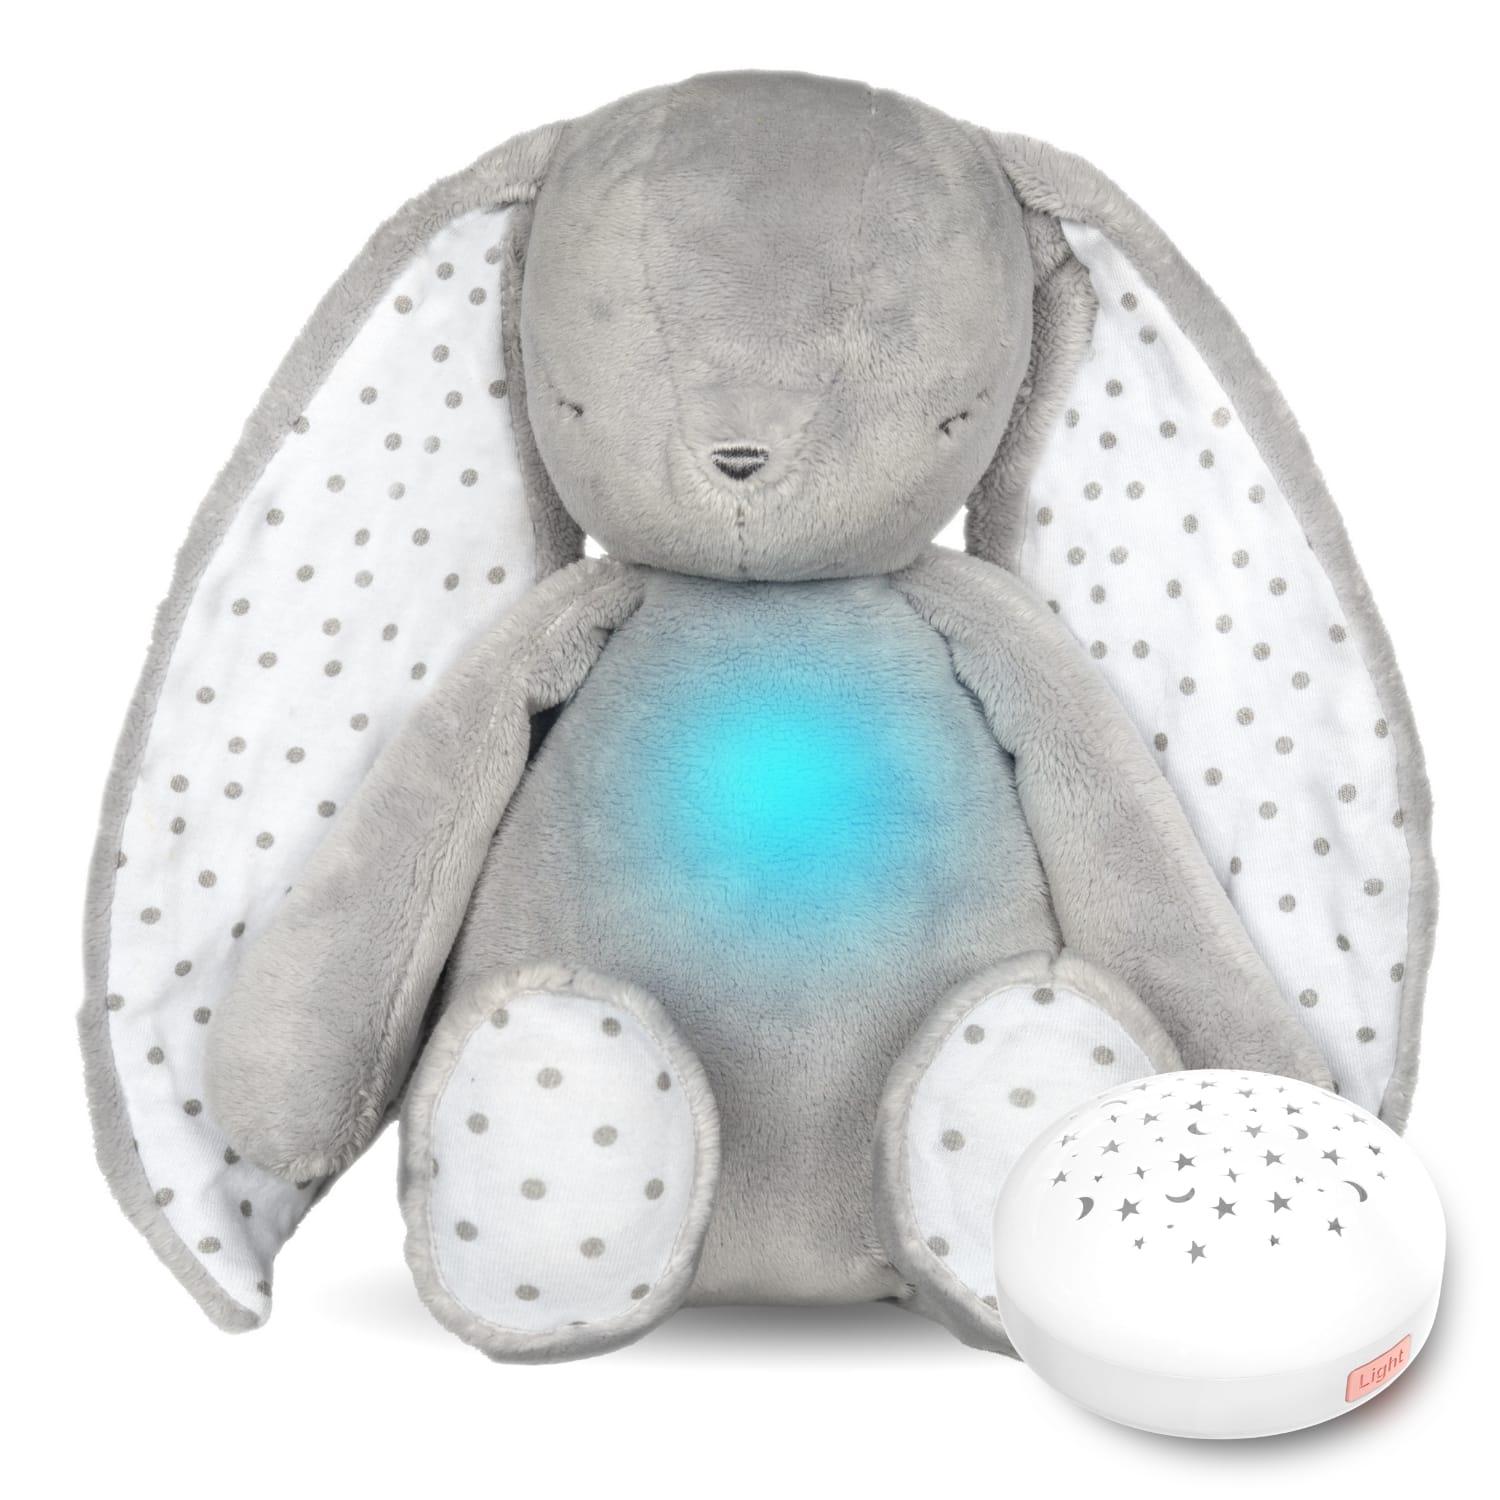 Diddou teddy bear's sounding plush (with star projector) - grey